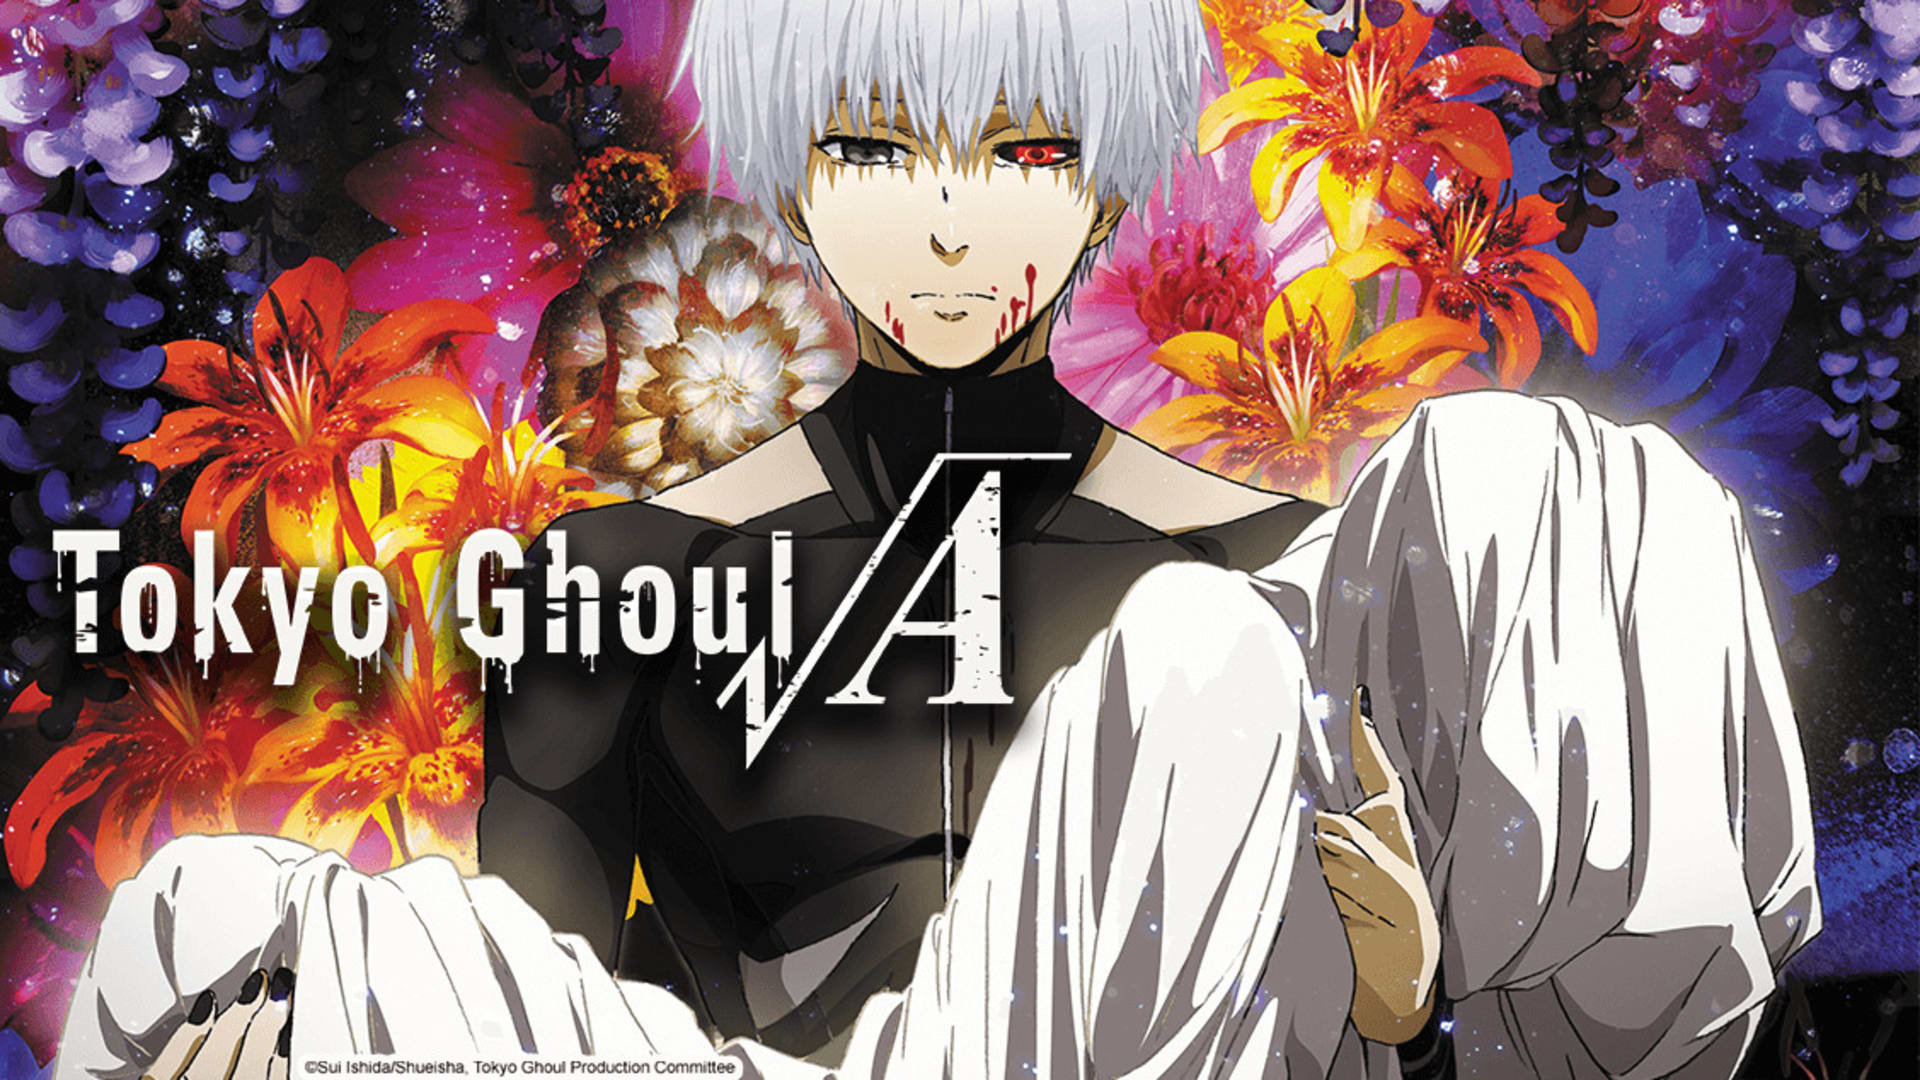 dick ingalls recommends Is Tokyo Ghoul Dubbed